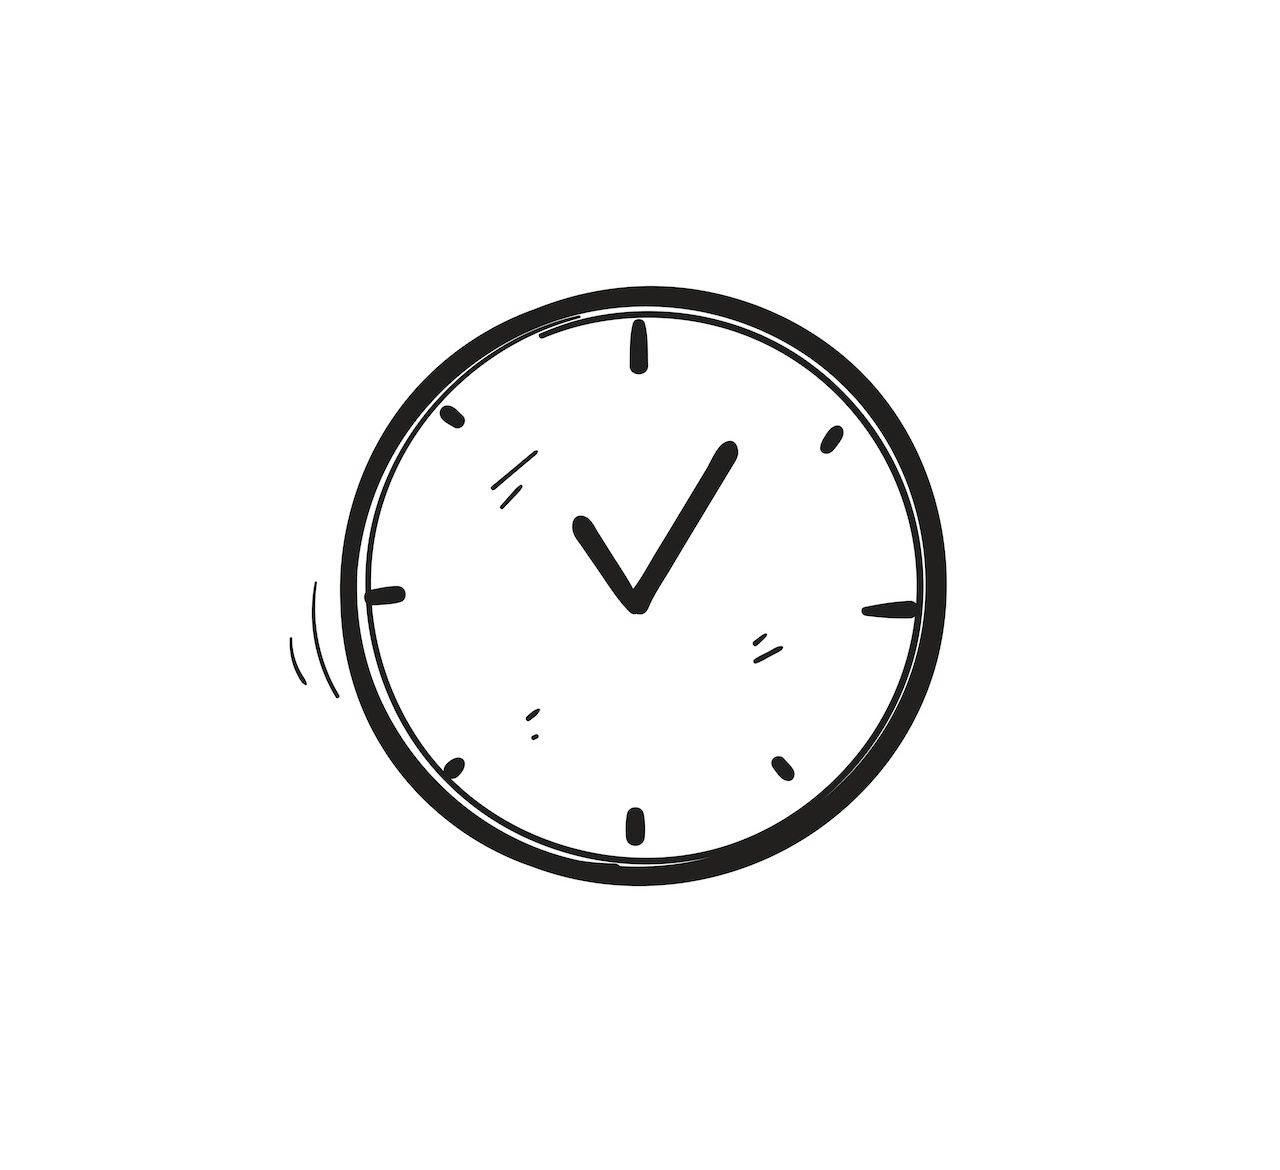 Simple drawing of a clock | Image credit: Gwens graphic studio - stock.adobe.com